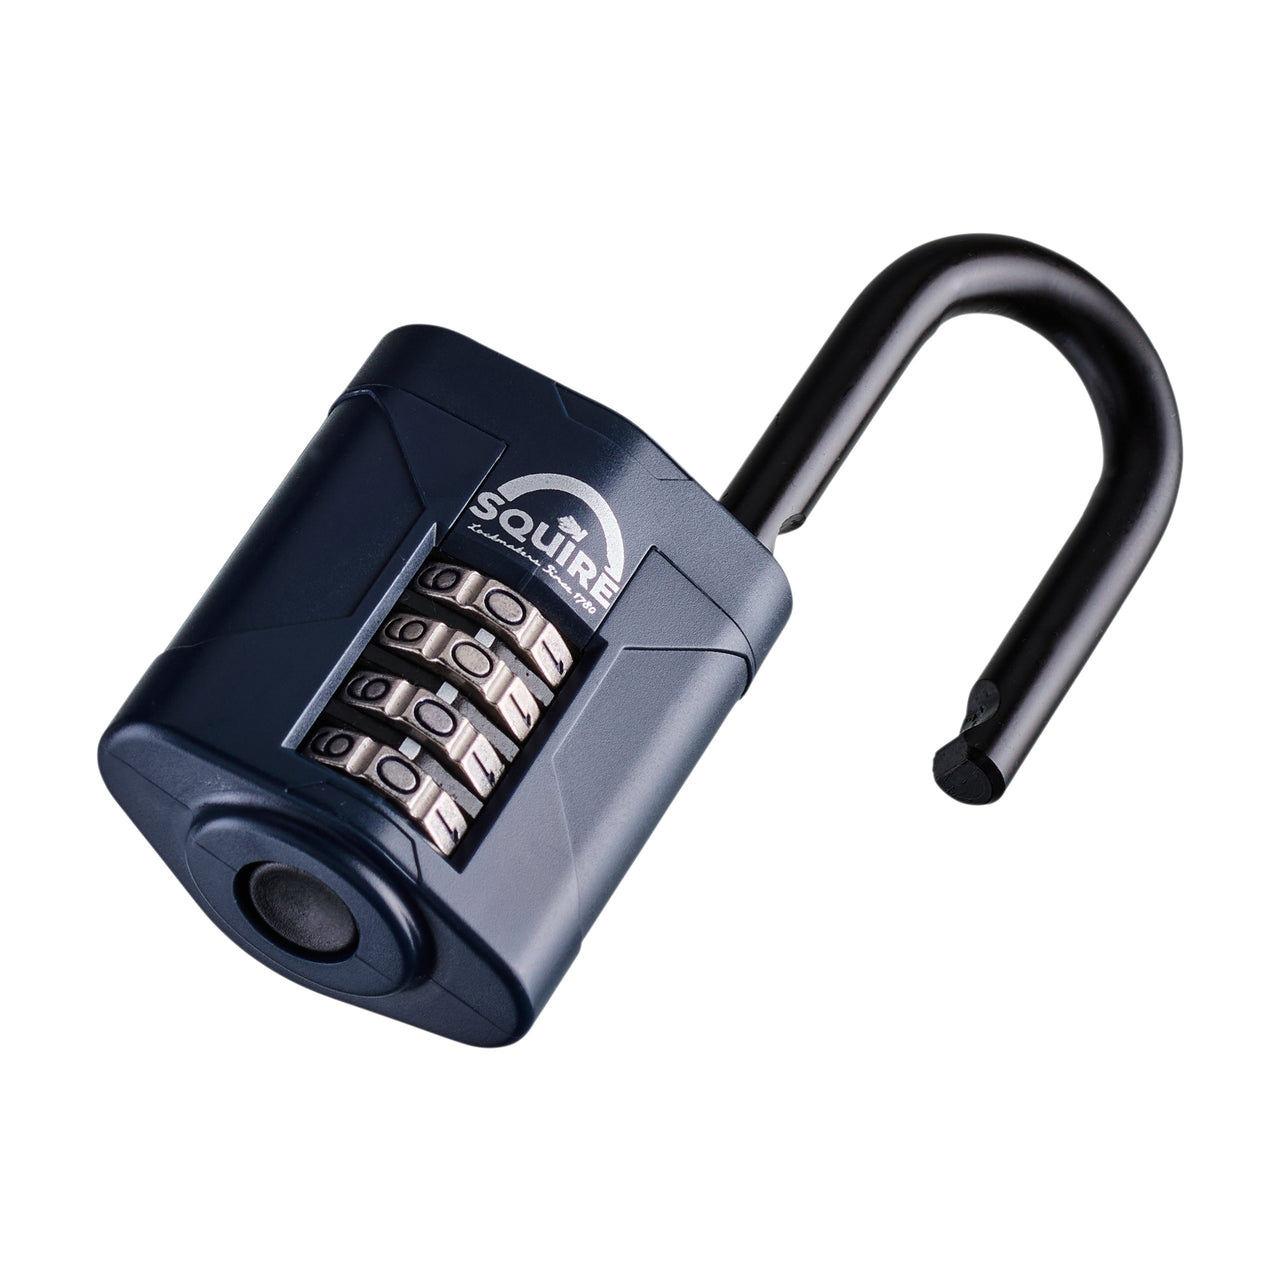 Squire CP50/1.5 Combination Padlock 1.5inch Long Shackle